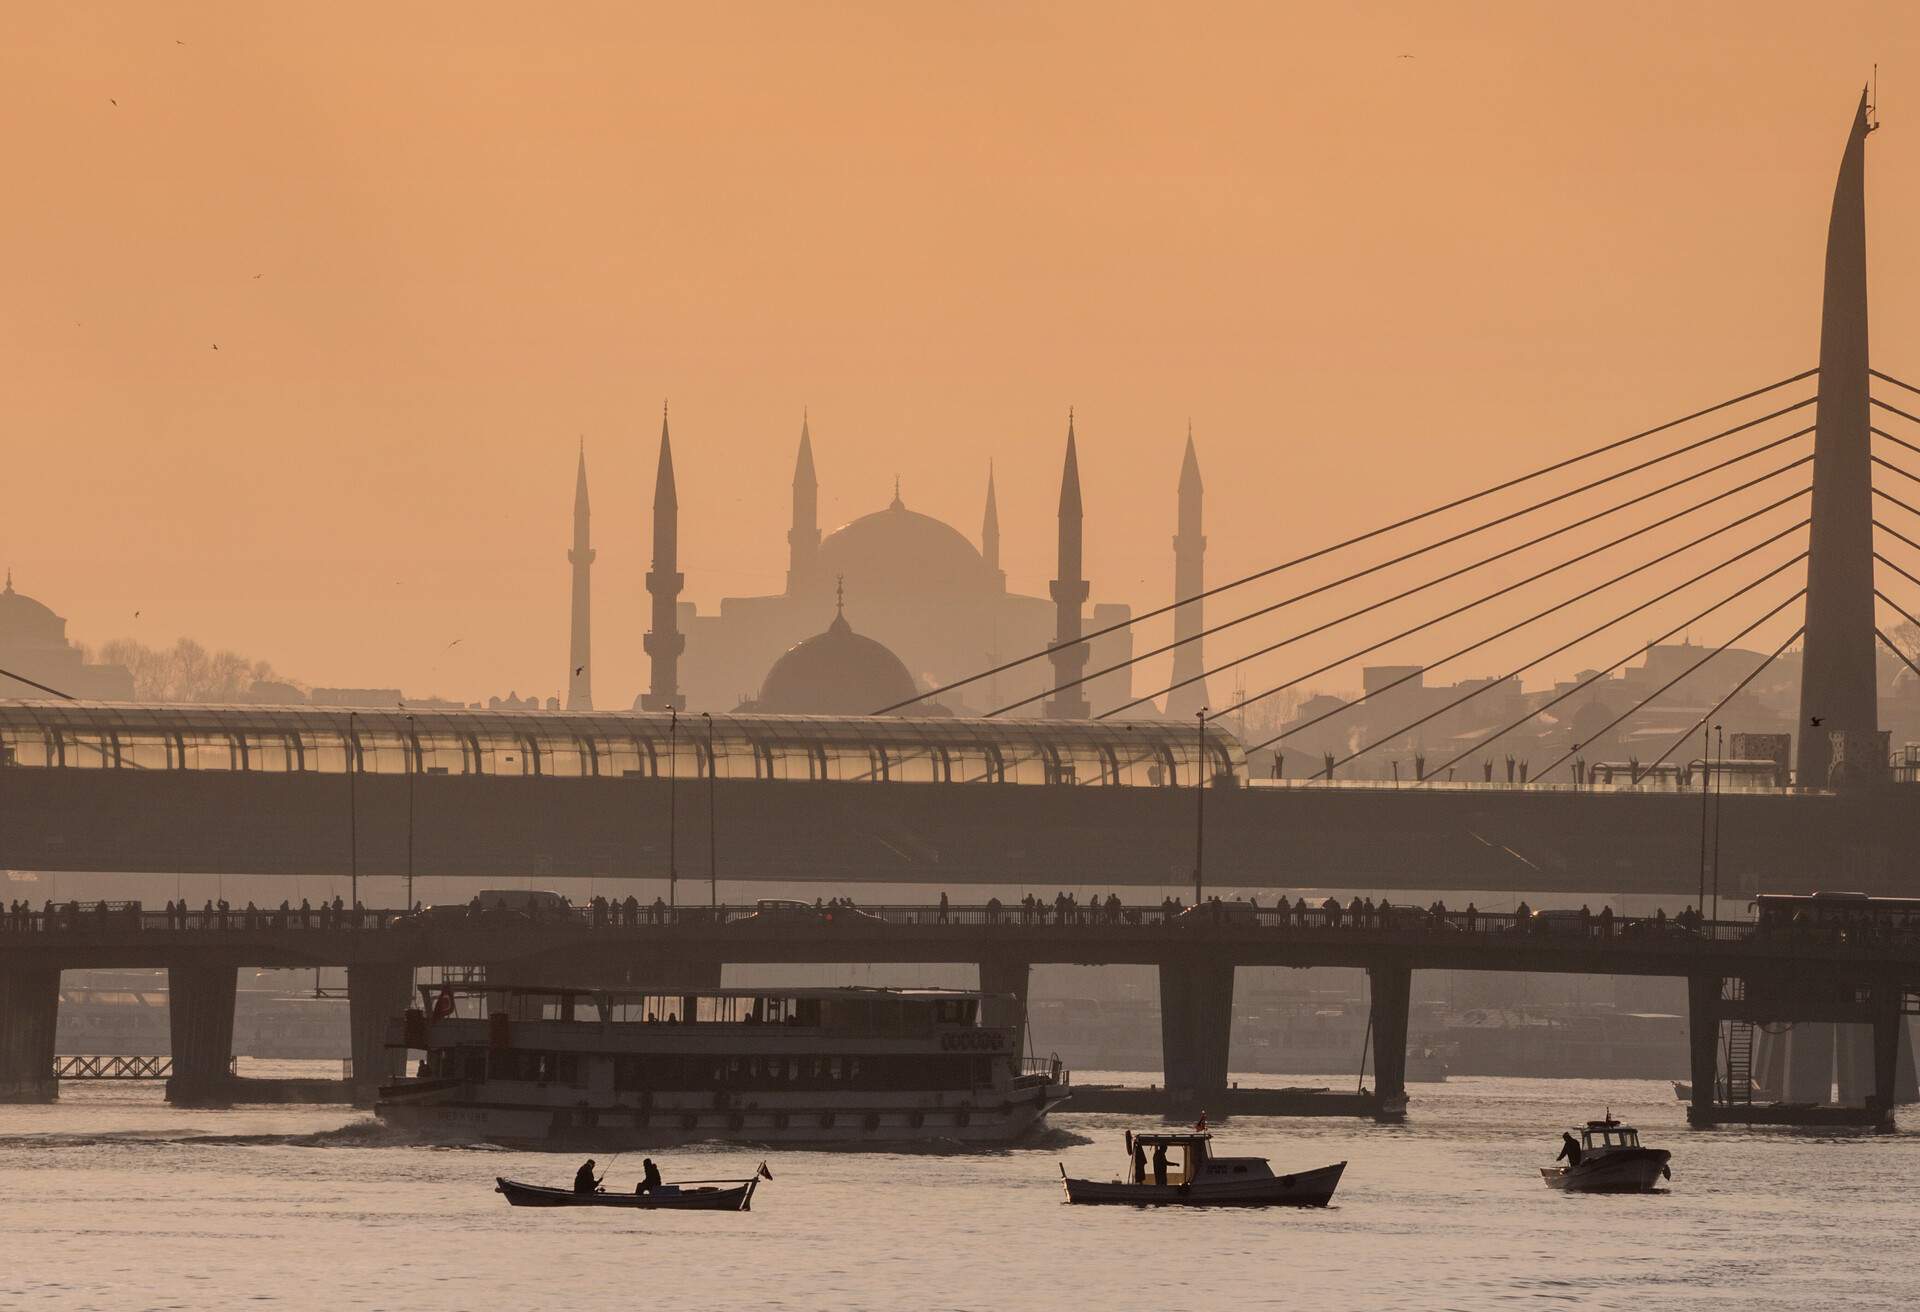 Distant view of The silhouetted New Mosque,The Hagia Sophia, The Metro Bridge and The Unkapani Bridge( spanning the Golden Horn)  with small fishing boats(sandal), seen from the Golden Horn ferry in the morning, in Istanbul, Turkey.